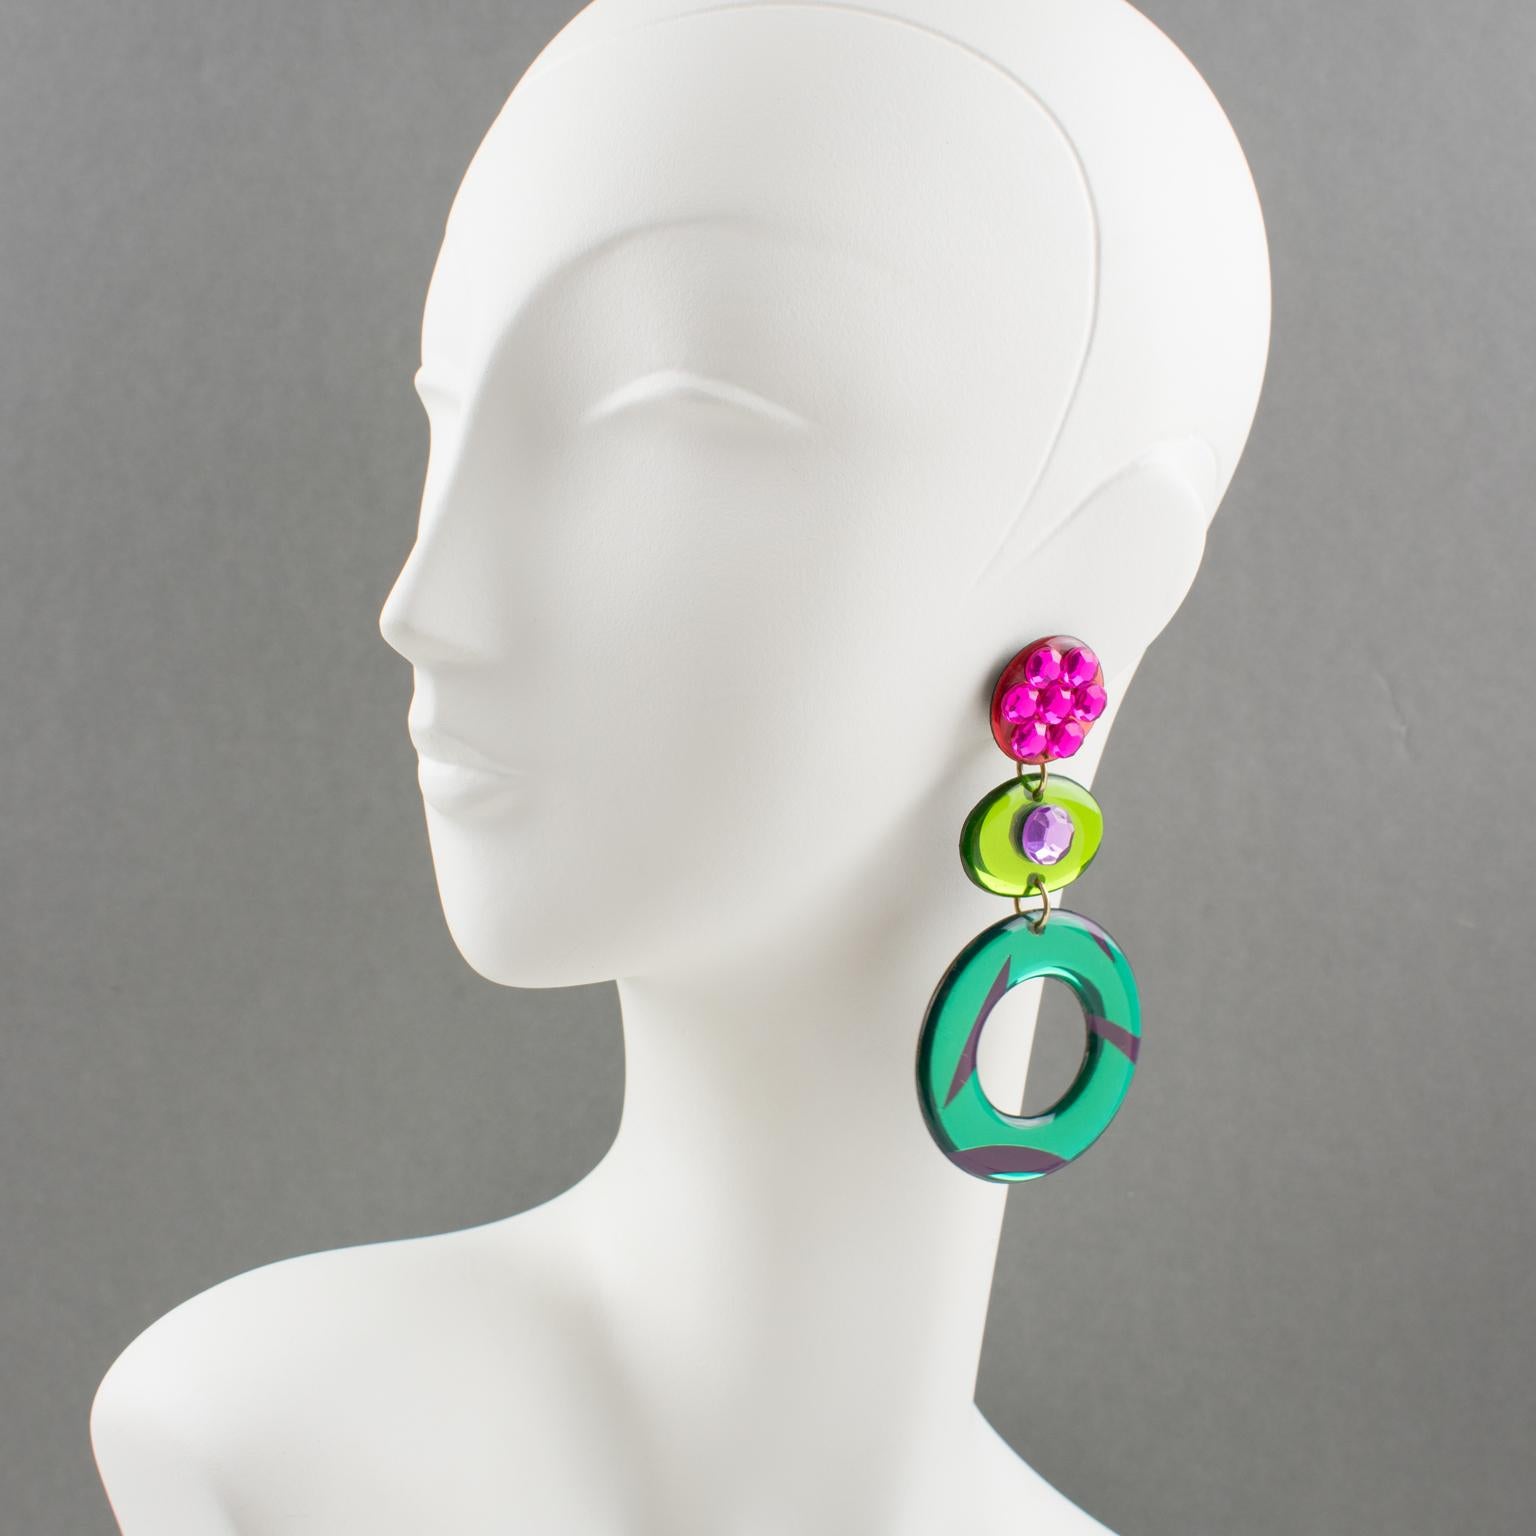 Stunning Lucite or Resin dangling clip-on earrings. Oversized chandelier design with ovoid and donut shape in emerald green, apple green, and salmon pink colors with mirror effect and textured pattern. Earrings are ornate with hot pink and light